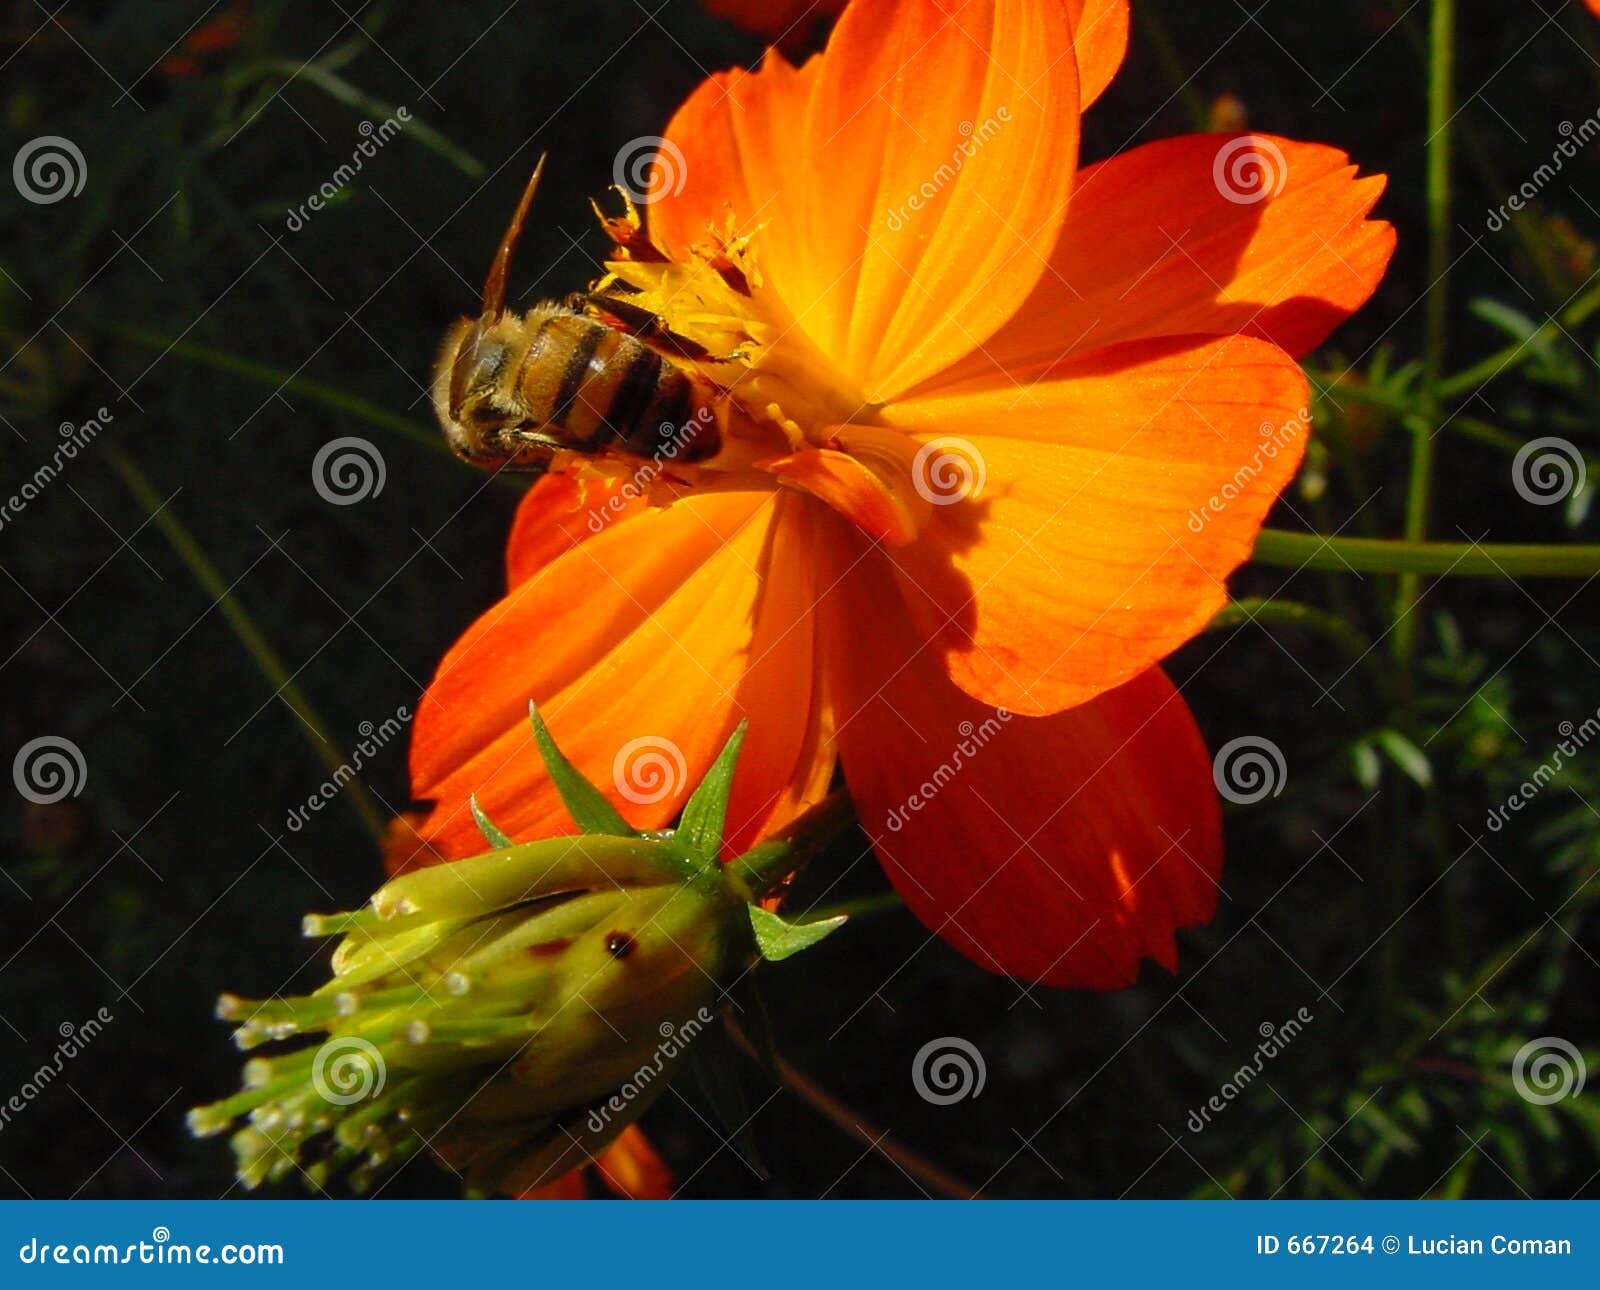 bee pollinating flower